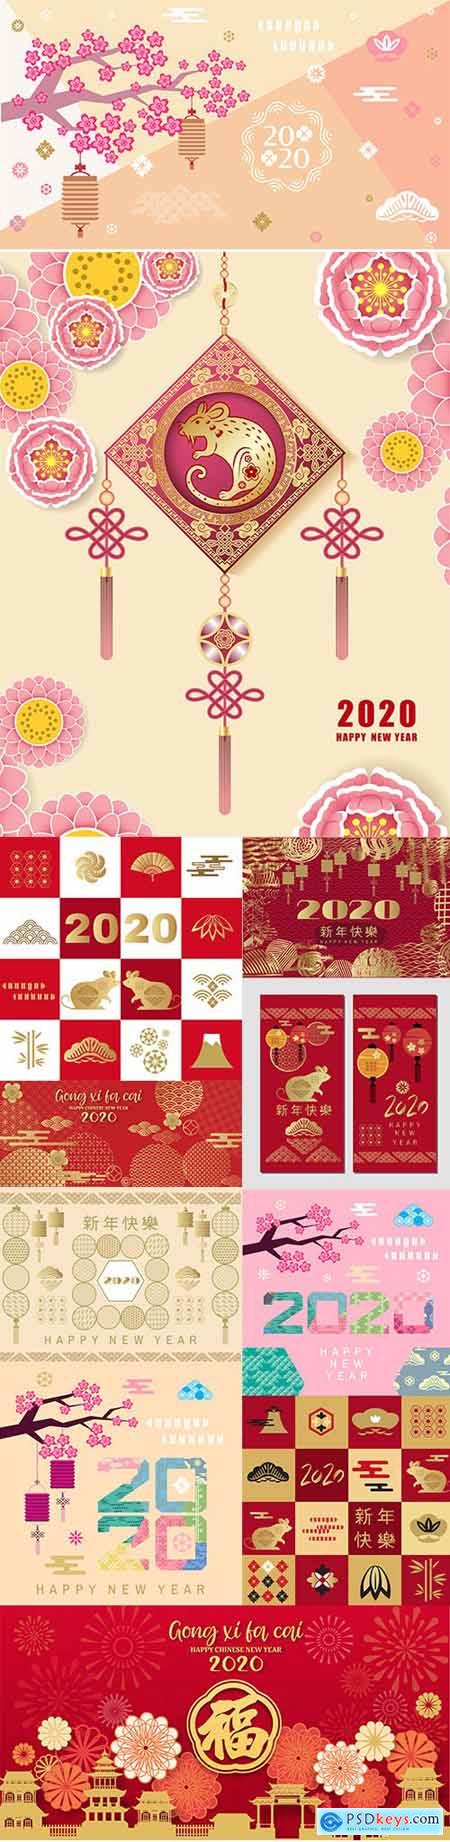 Set of Chinese New Year 2020 Web Banner and Illustration vol3